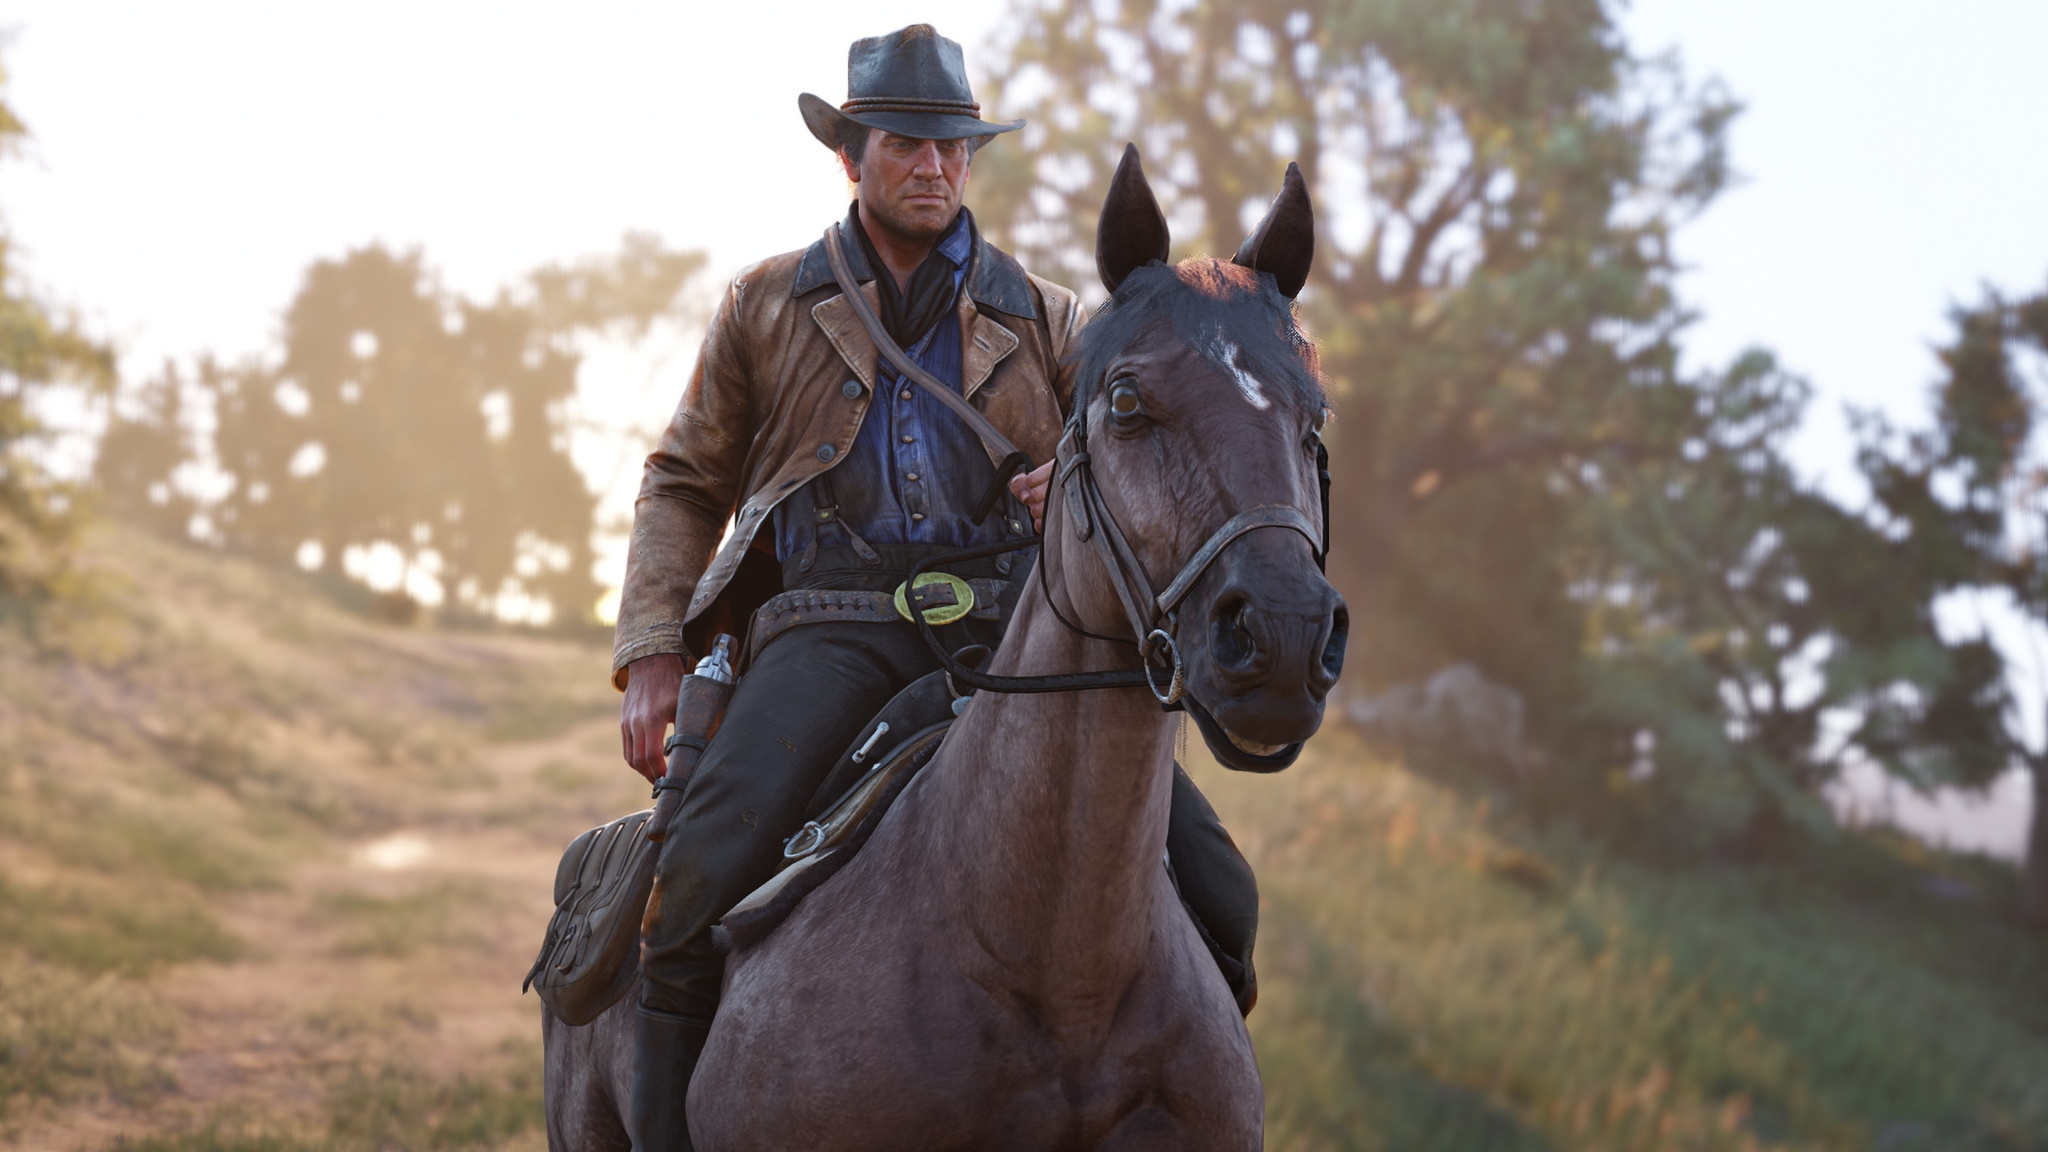 Wallpaper 2018 Game, Horse Ride, Arthur Morgan, Red - Red Dead Redemption 2 Riding Horse , HD Wallpaper & Backgrounds